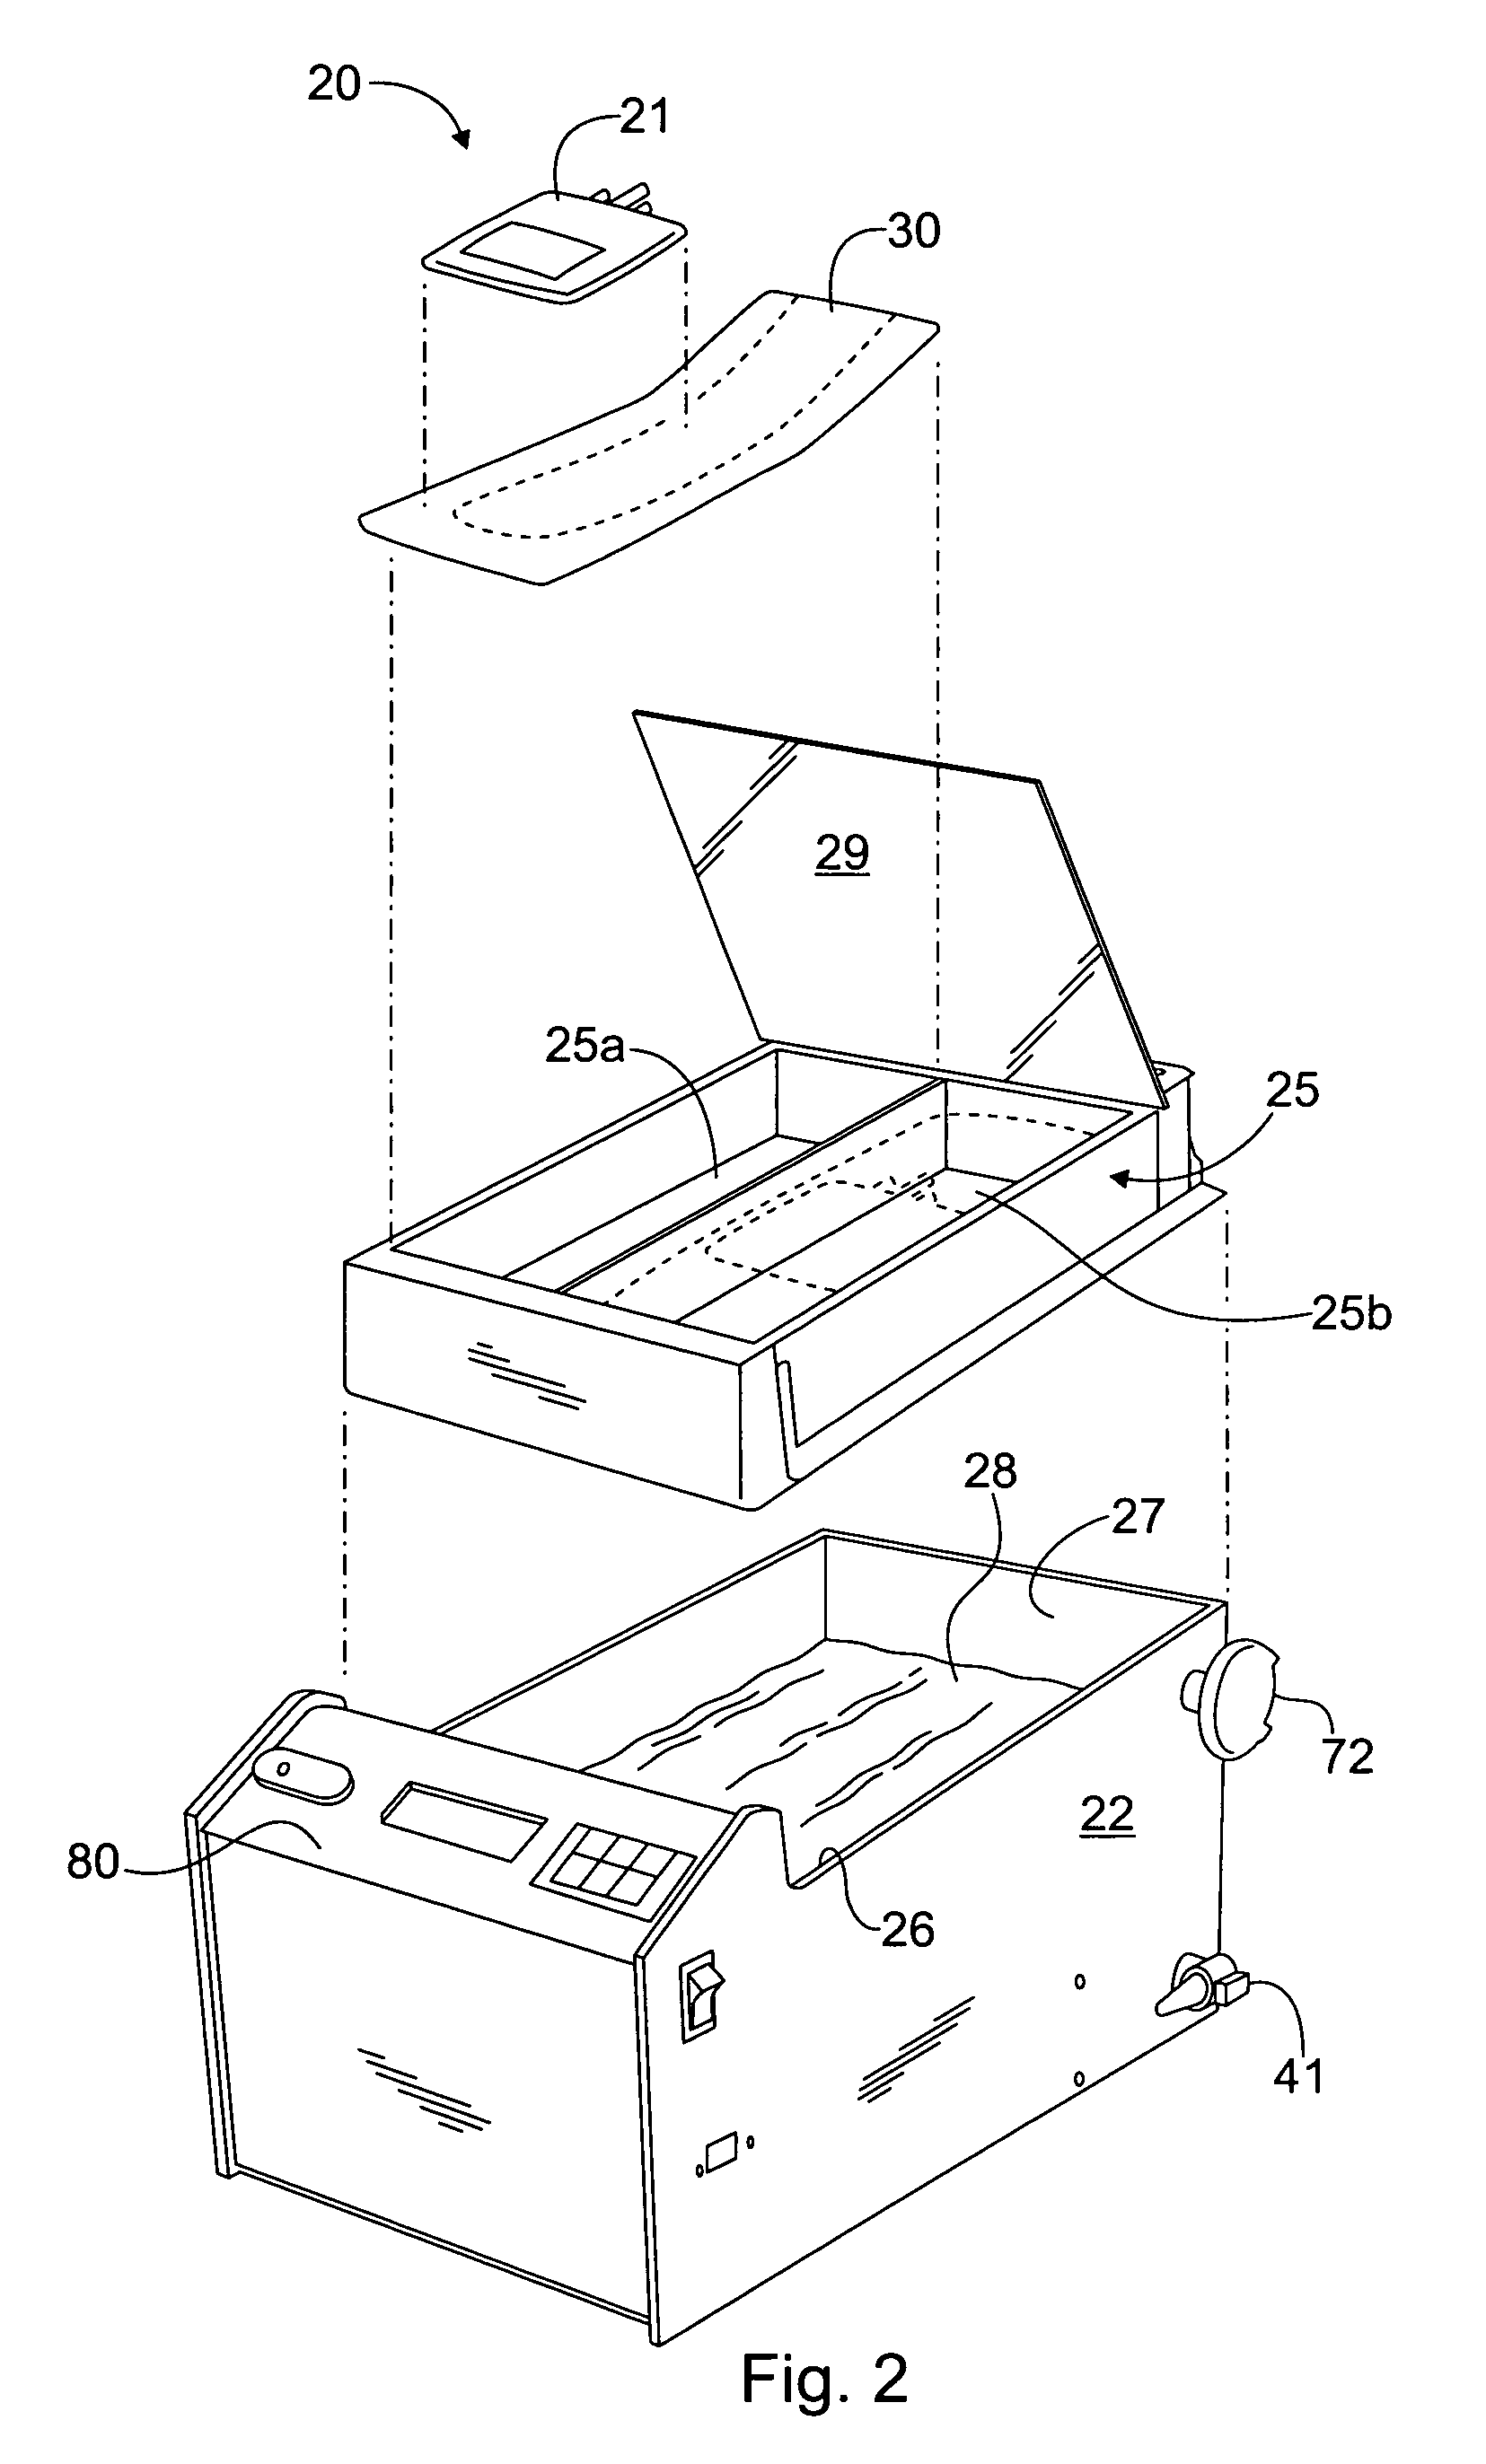 Apparatus and method for thawing biological materials